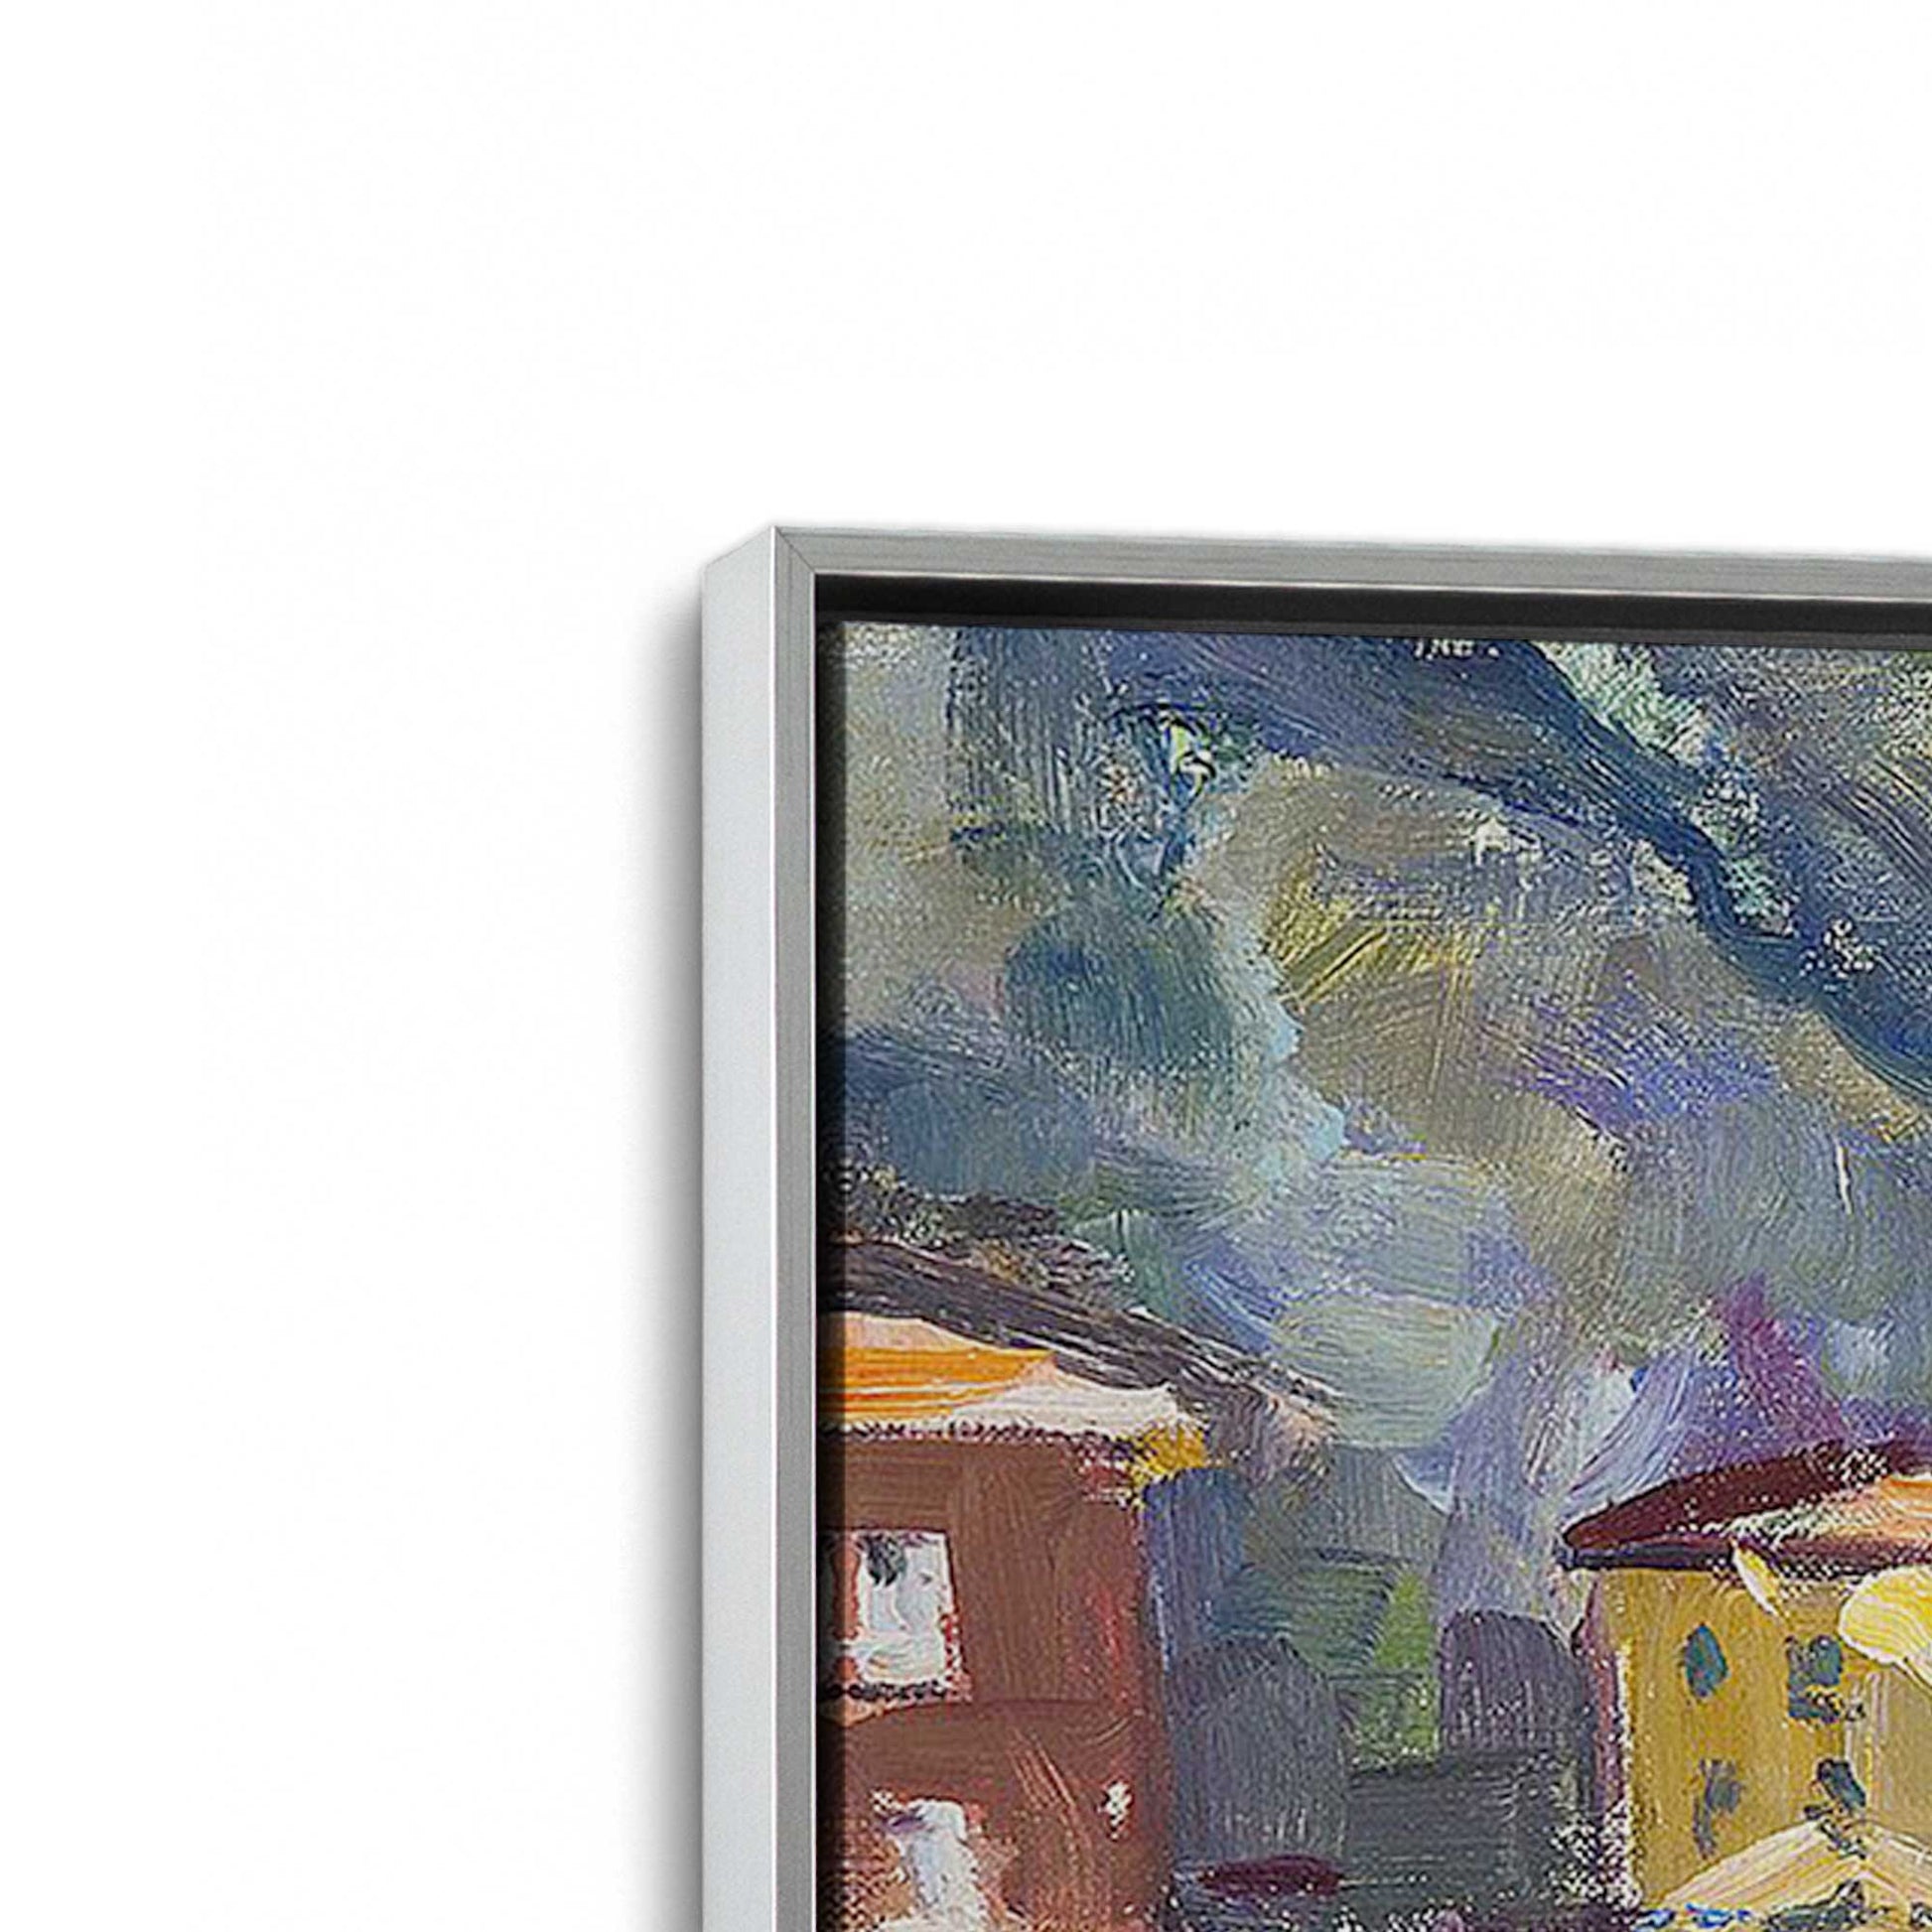 [Color:Polished Chrome], Picture of art in a Polished Chrome frame at an angle